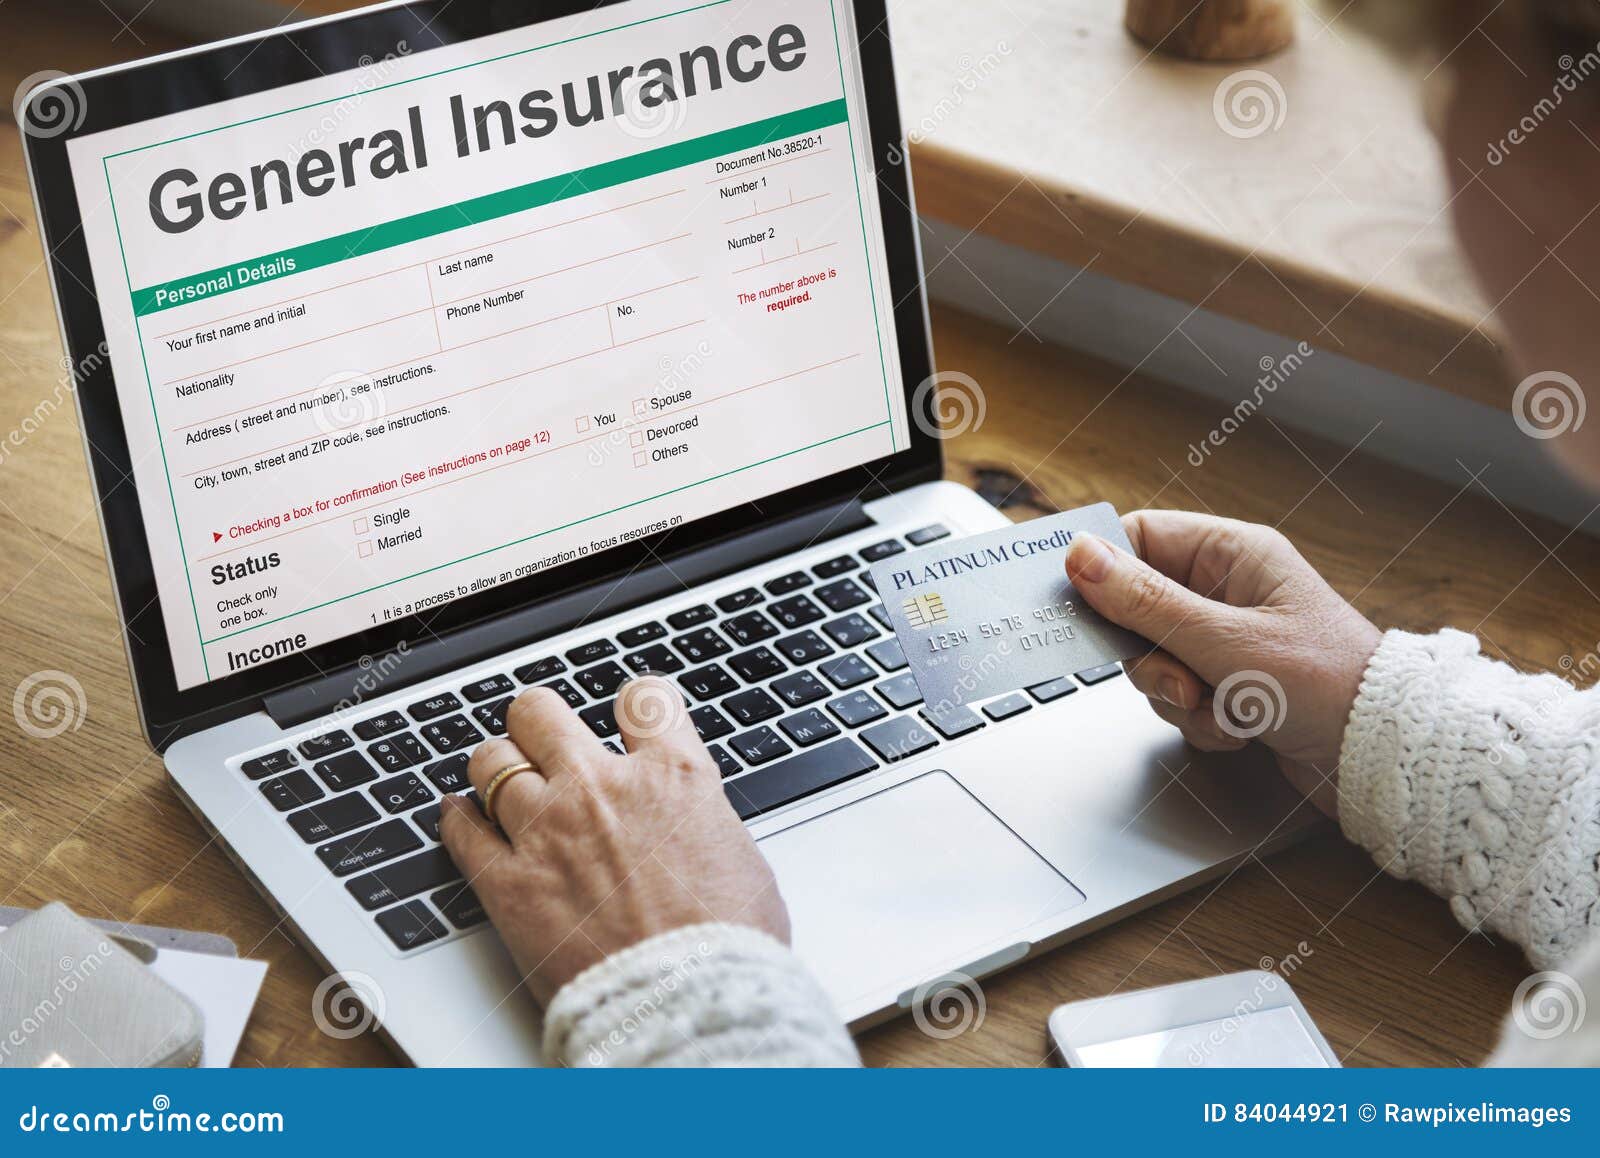 General Insurance Rebate Form Information COncept Stock Image - Image of identification, banking ...